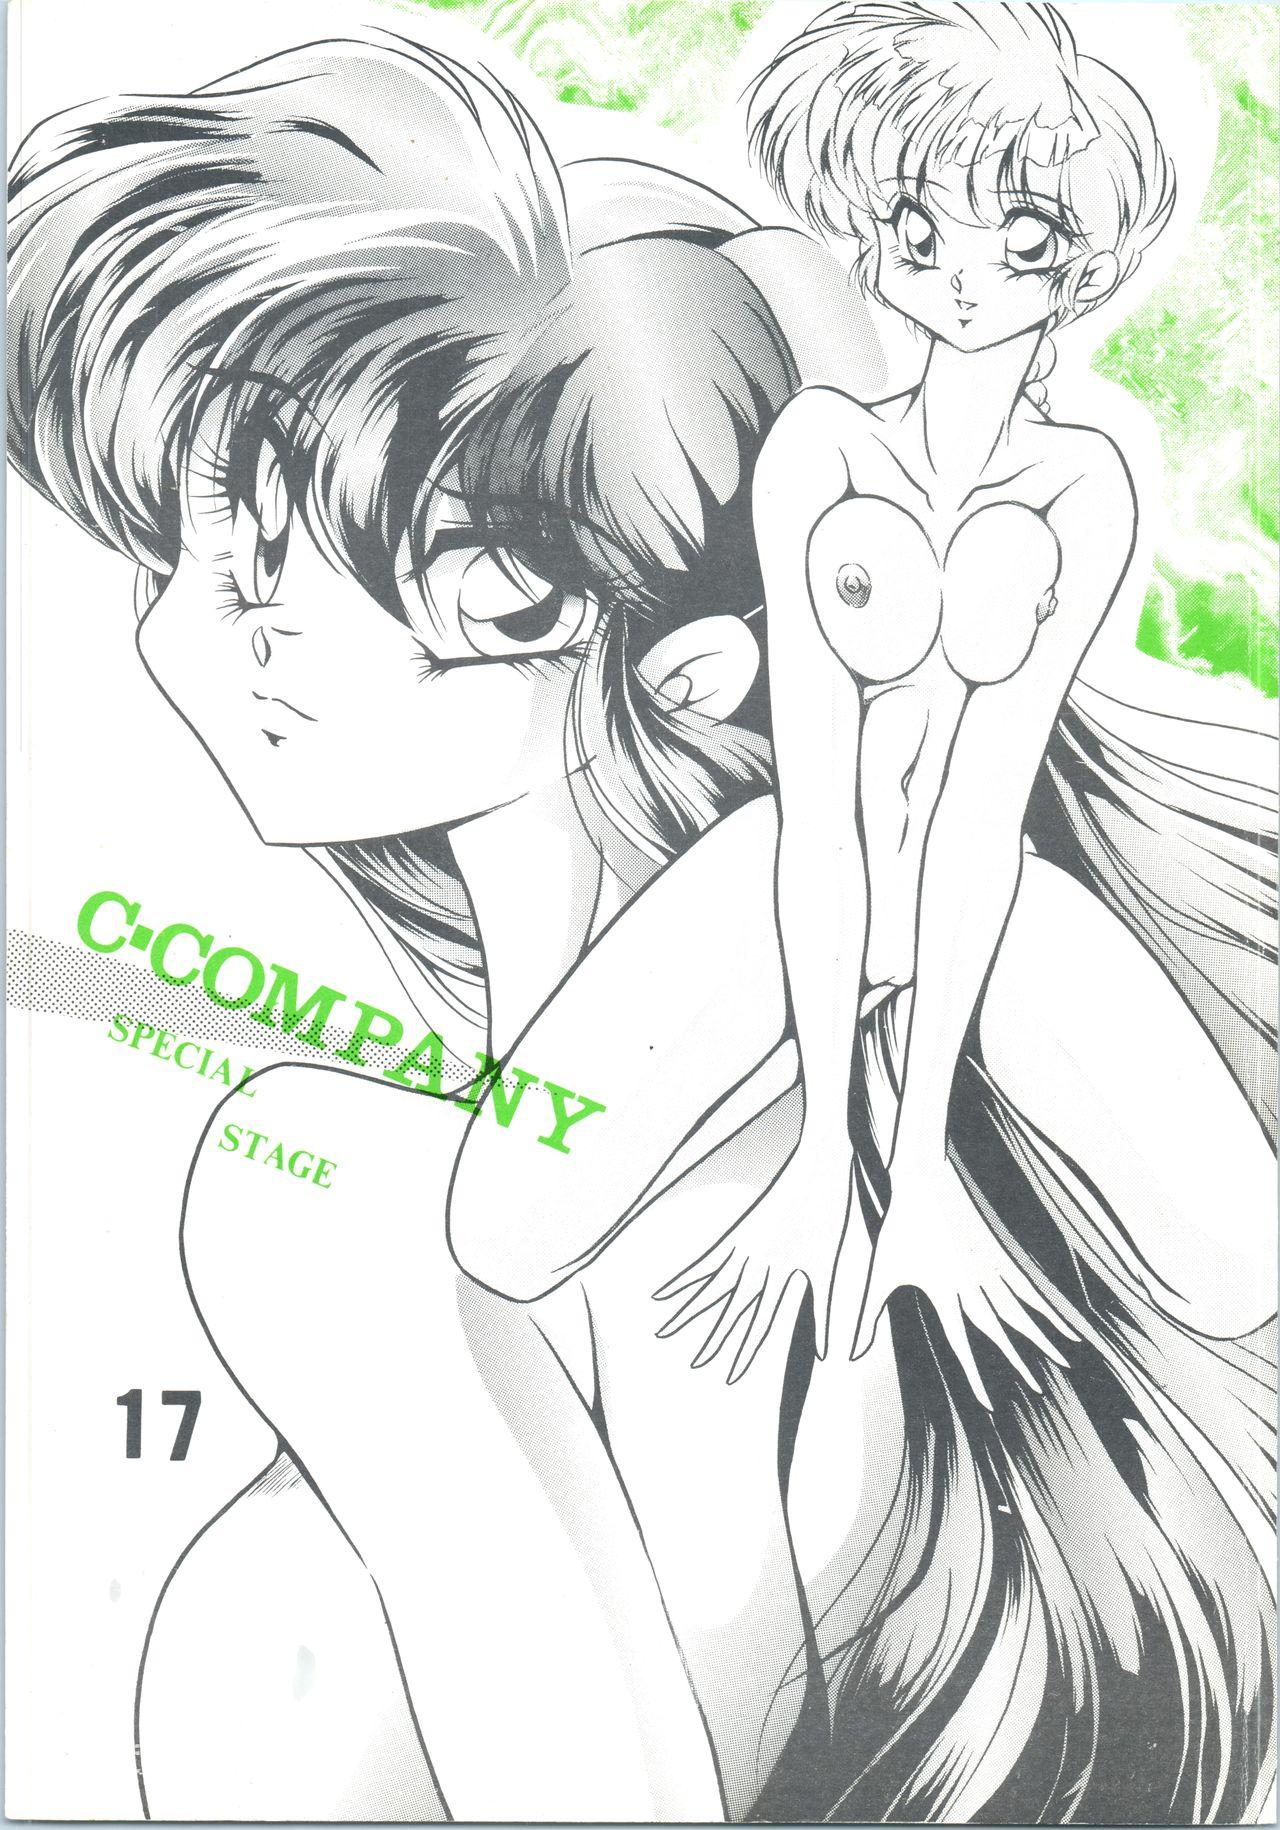 Village C-COMPANY SPECIAL STAGE 17 - Ranma 12 Idol project Ass Sex - Picture 1